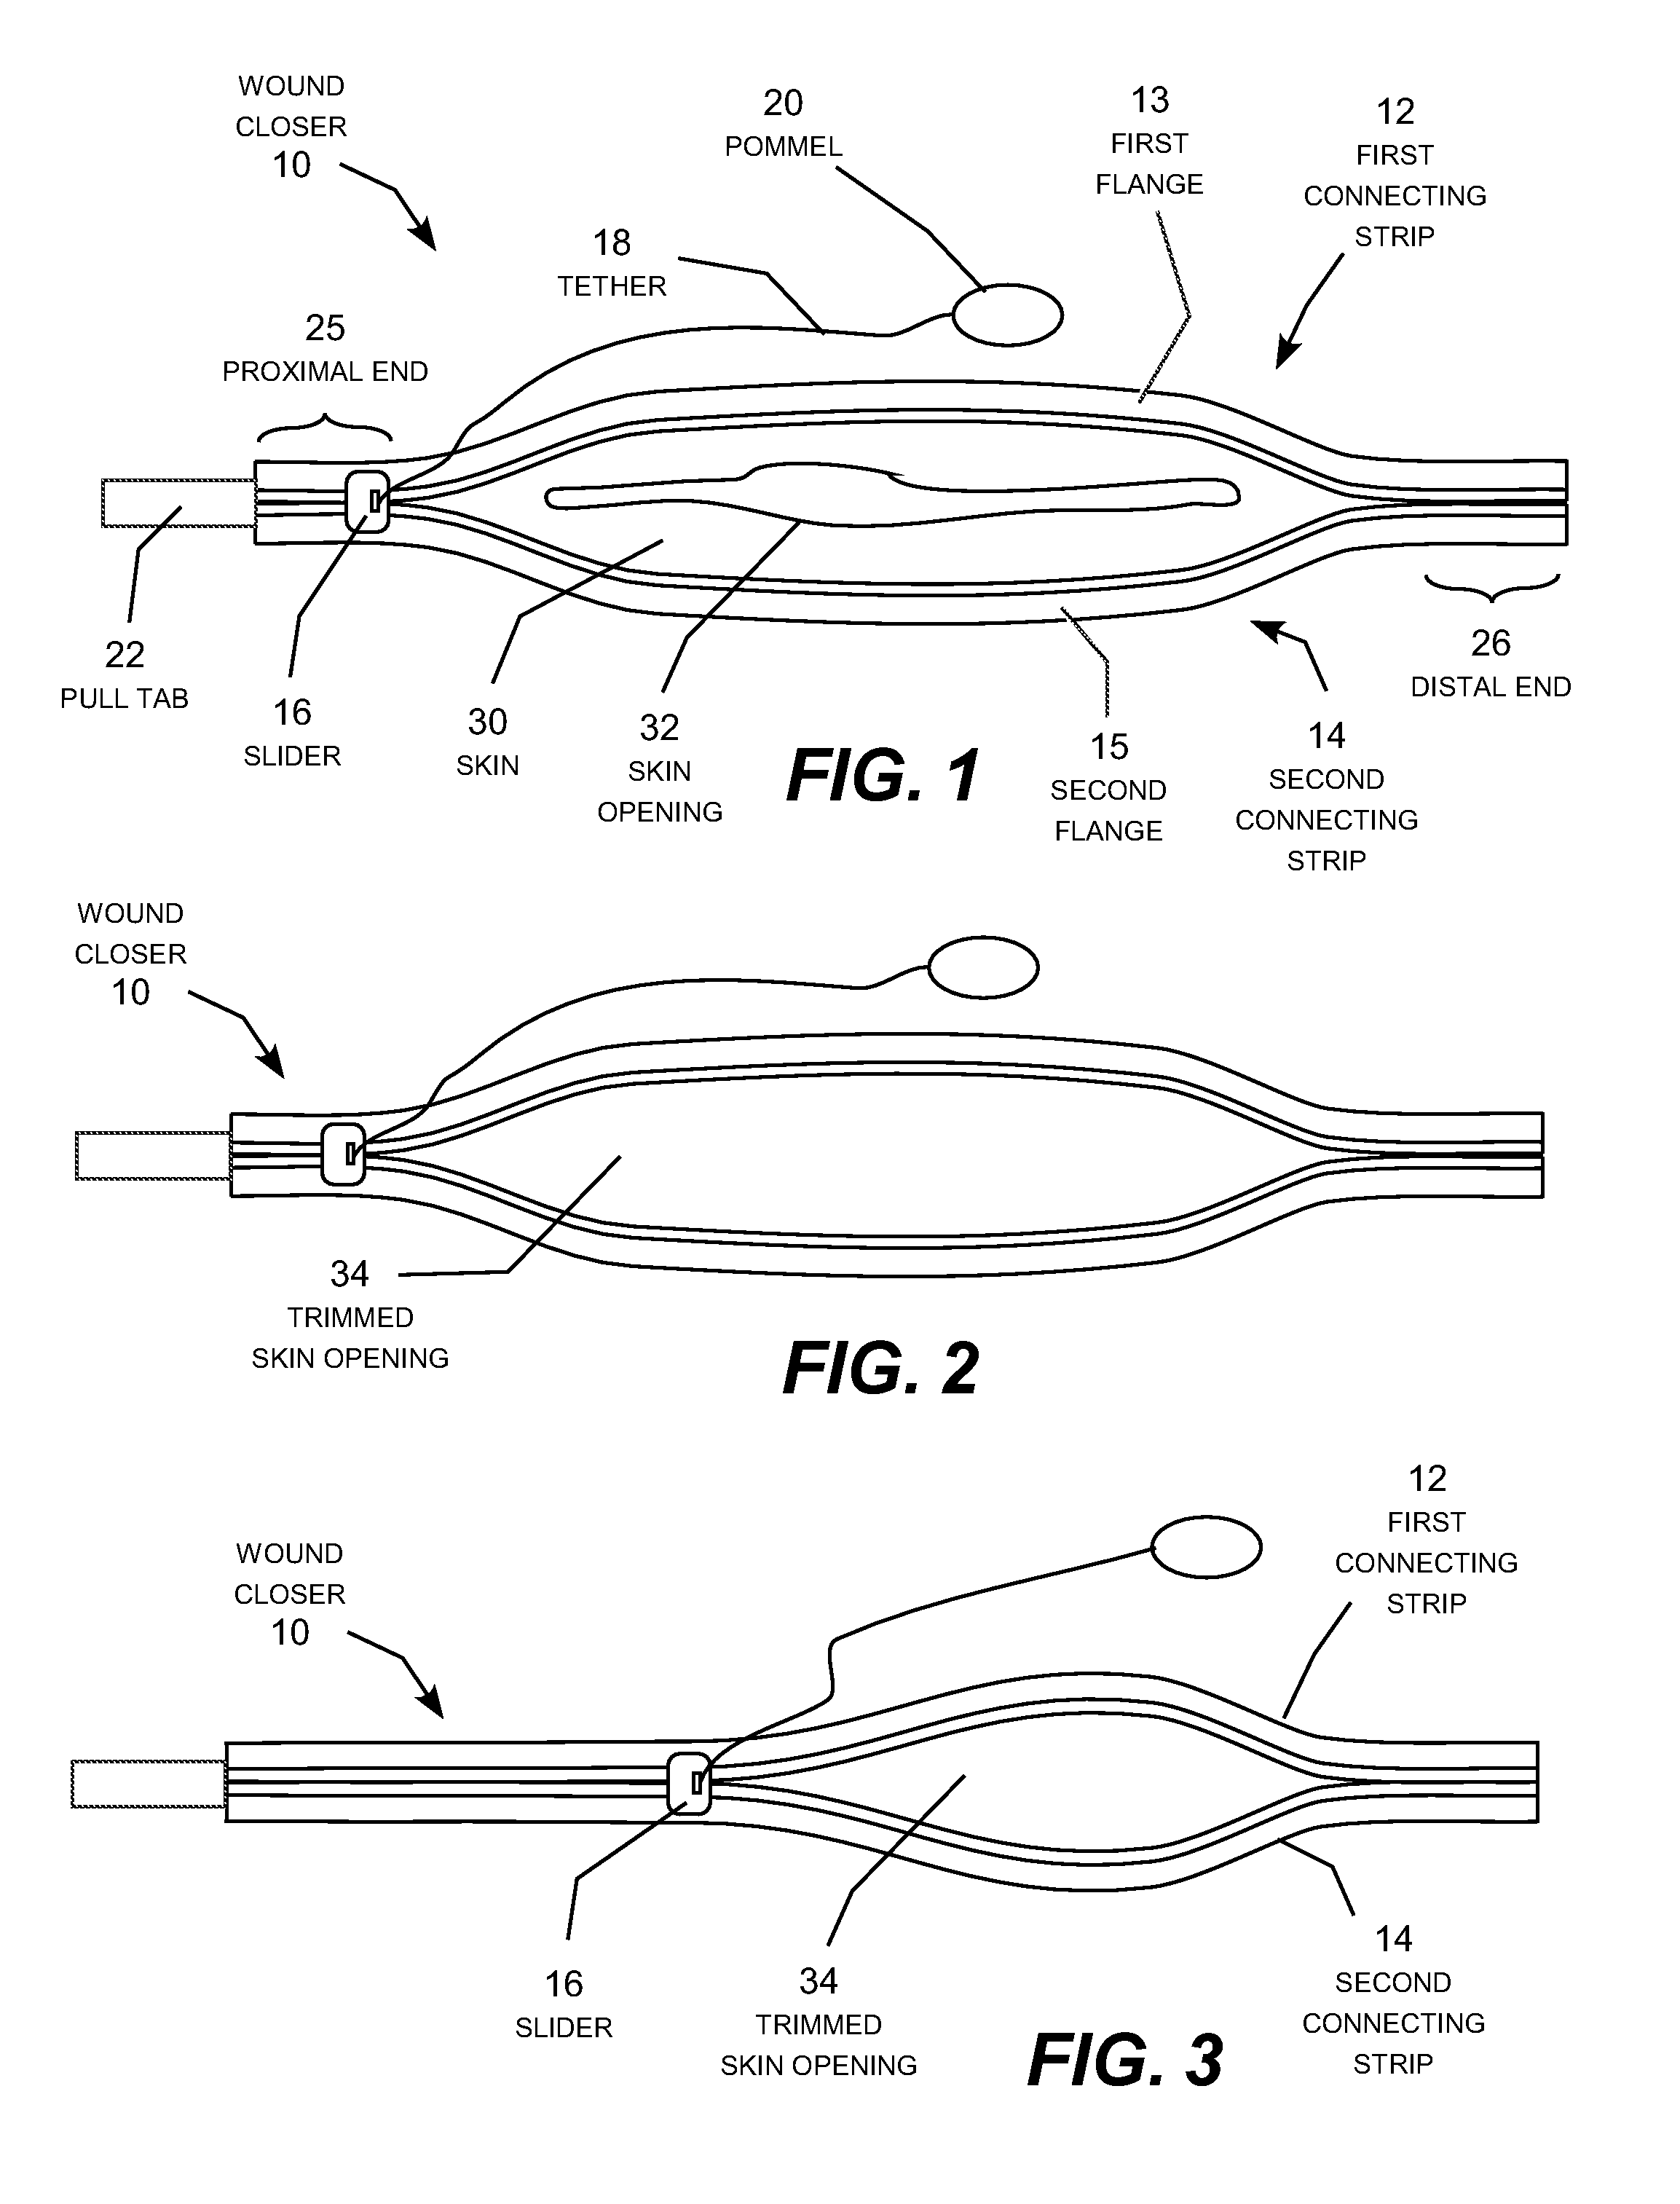 Method and device for mending skin openings